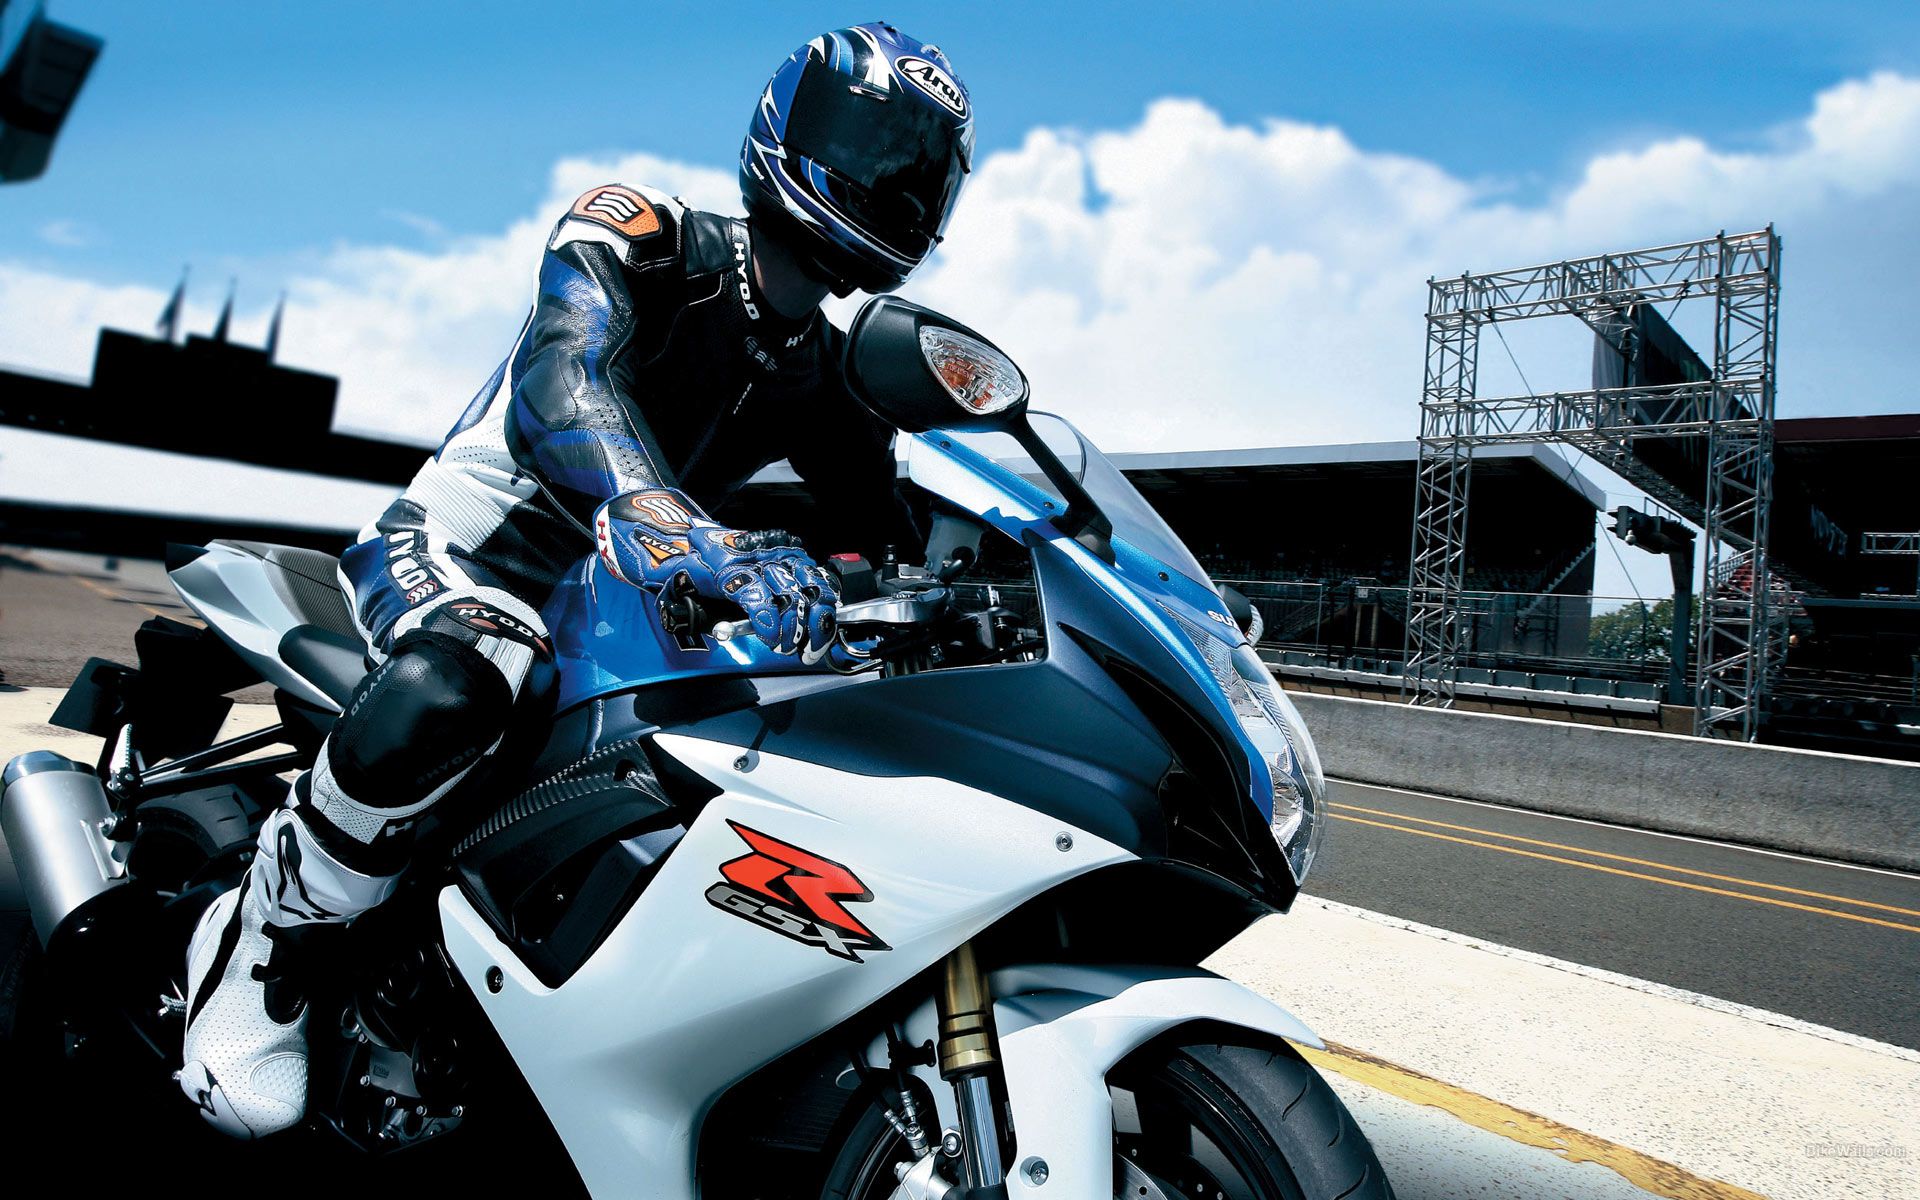 Ranking the best motorcycle jackets of 2022